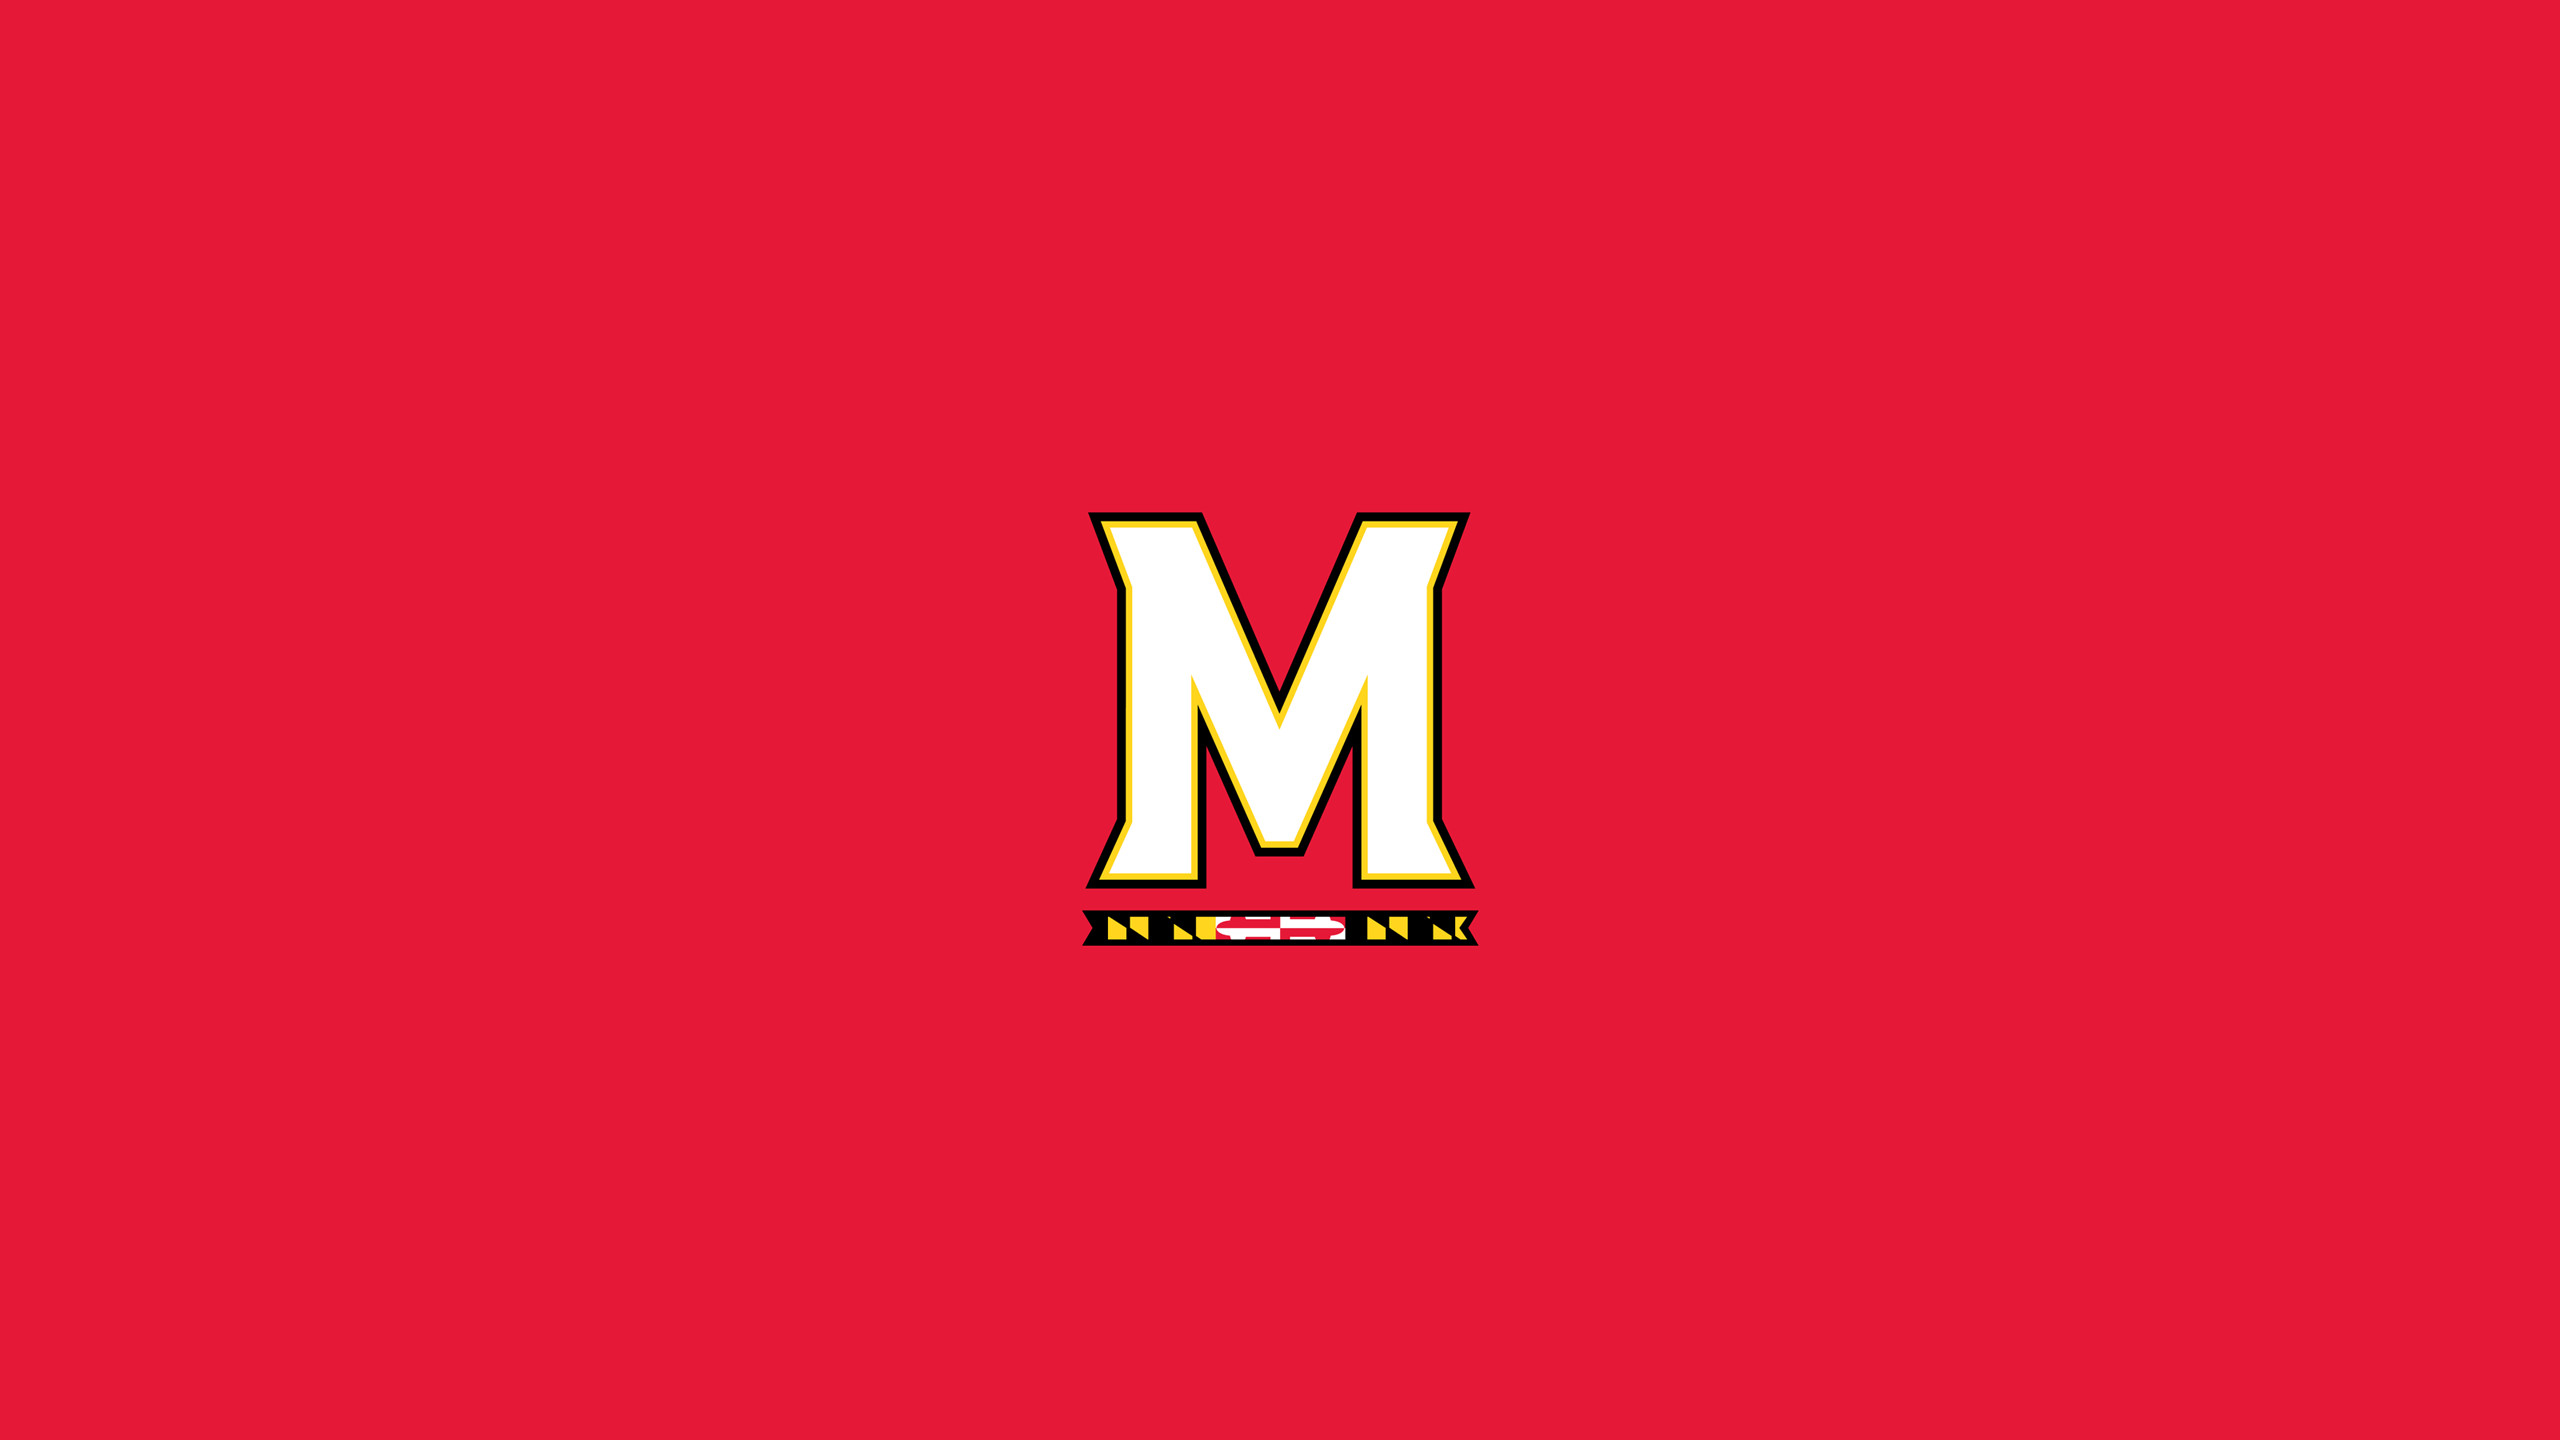 2560x1440 University Of Maryland Wallpapers by Alicia Hayes #12